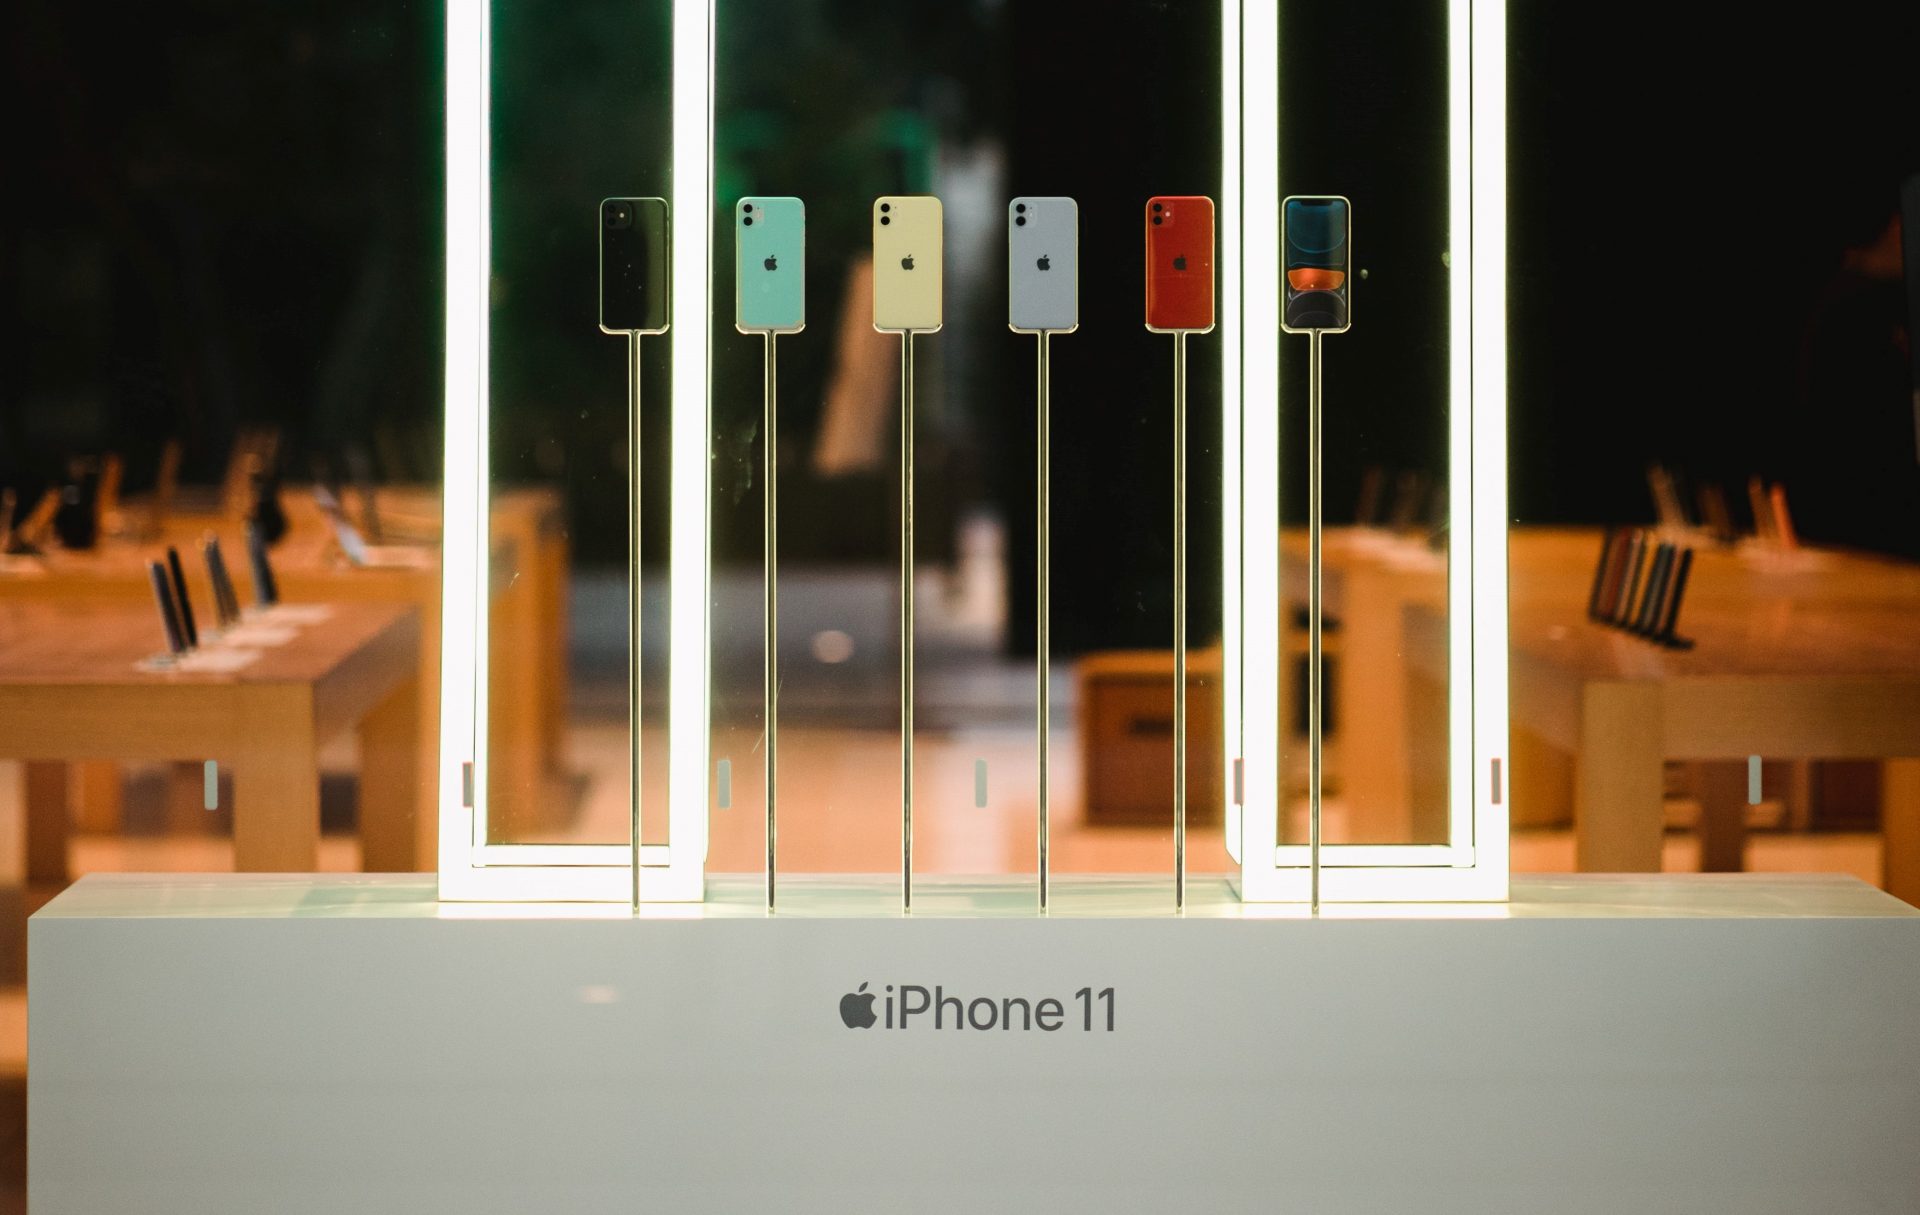 Counterpoint-China-Smartphone-Market-Q4-2019-Apple-Regains-With-iPhone-11-Series.jpg